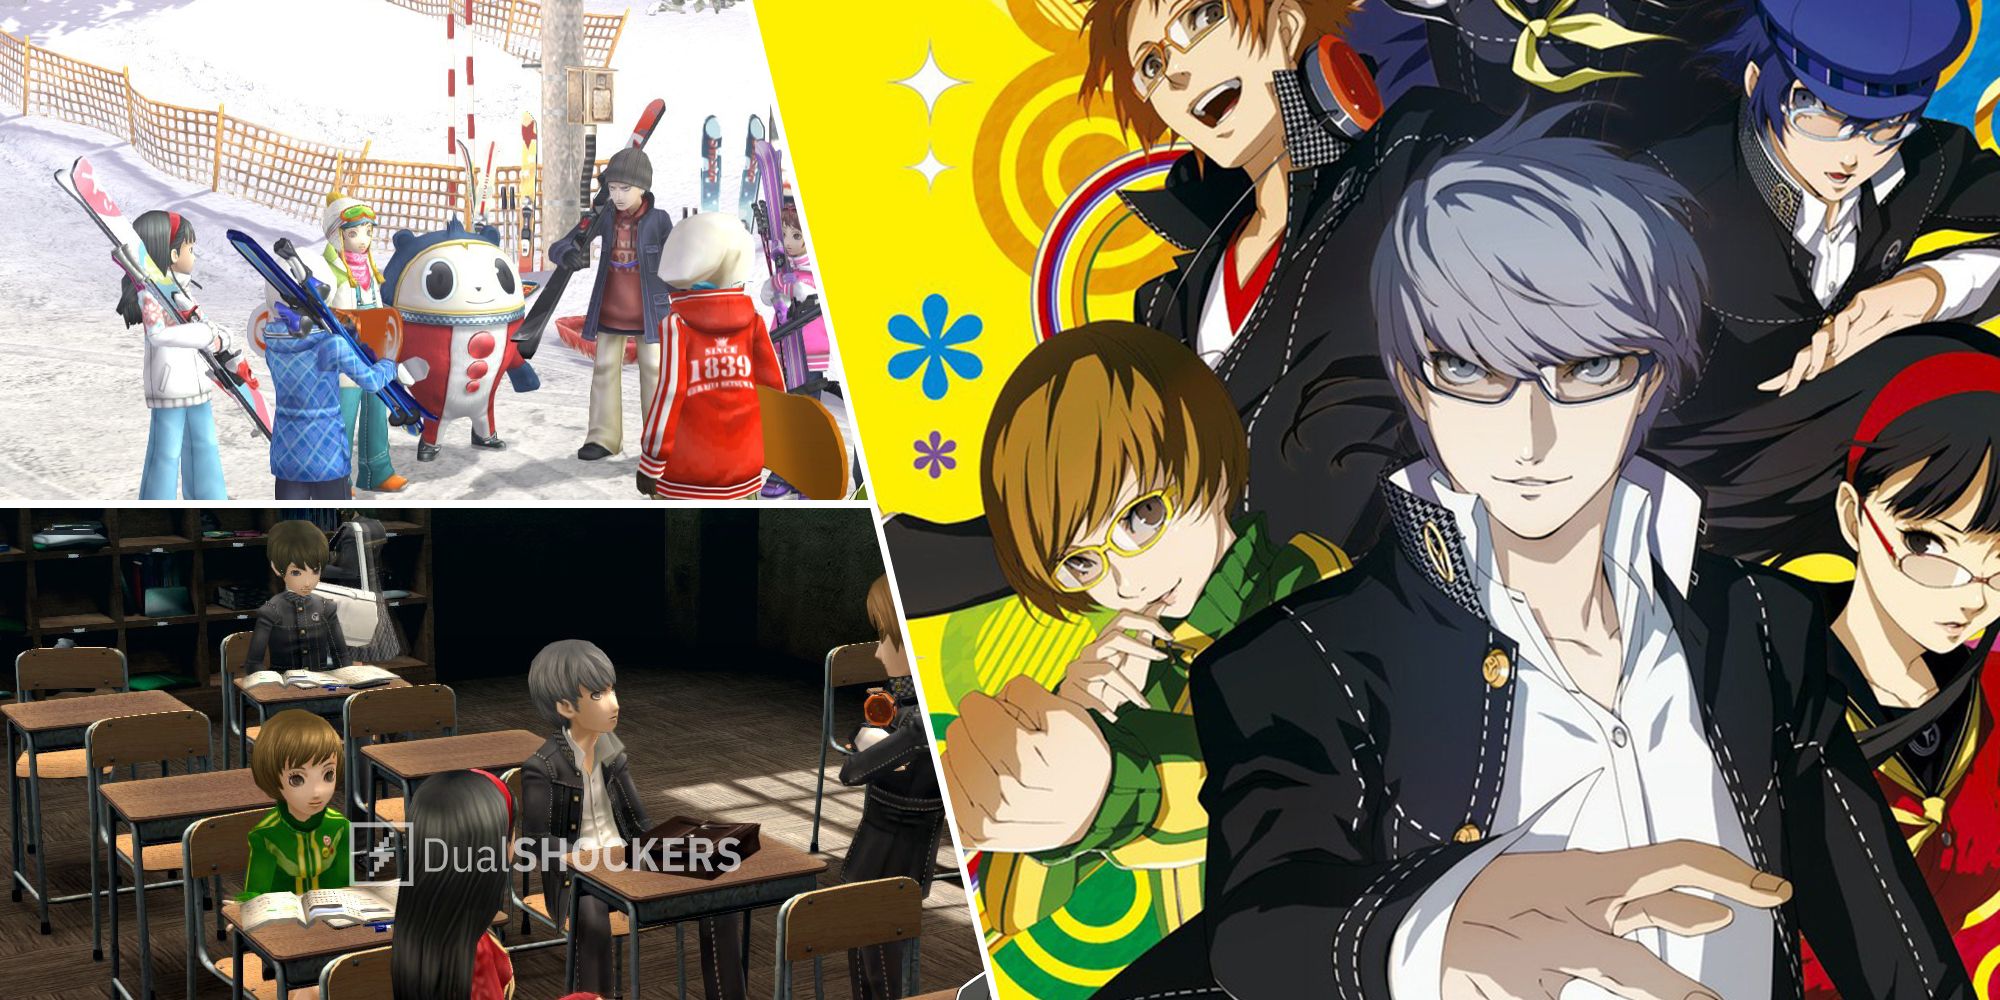 Persona 4 Golden skiing with characters, classroom setting, promo image